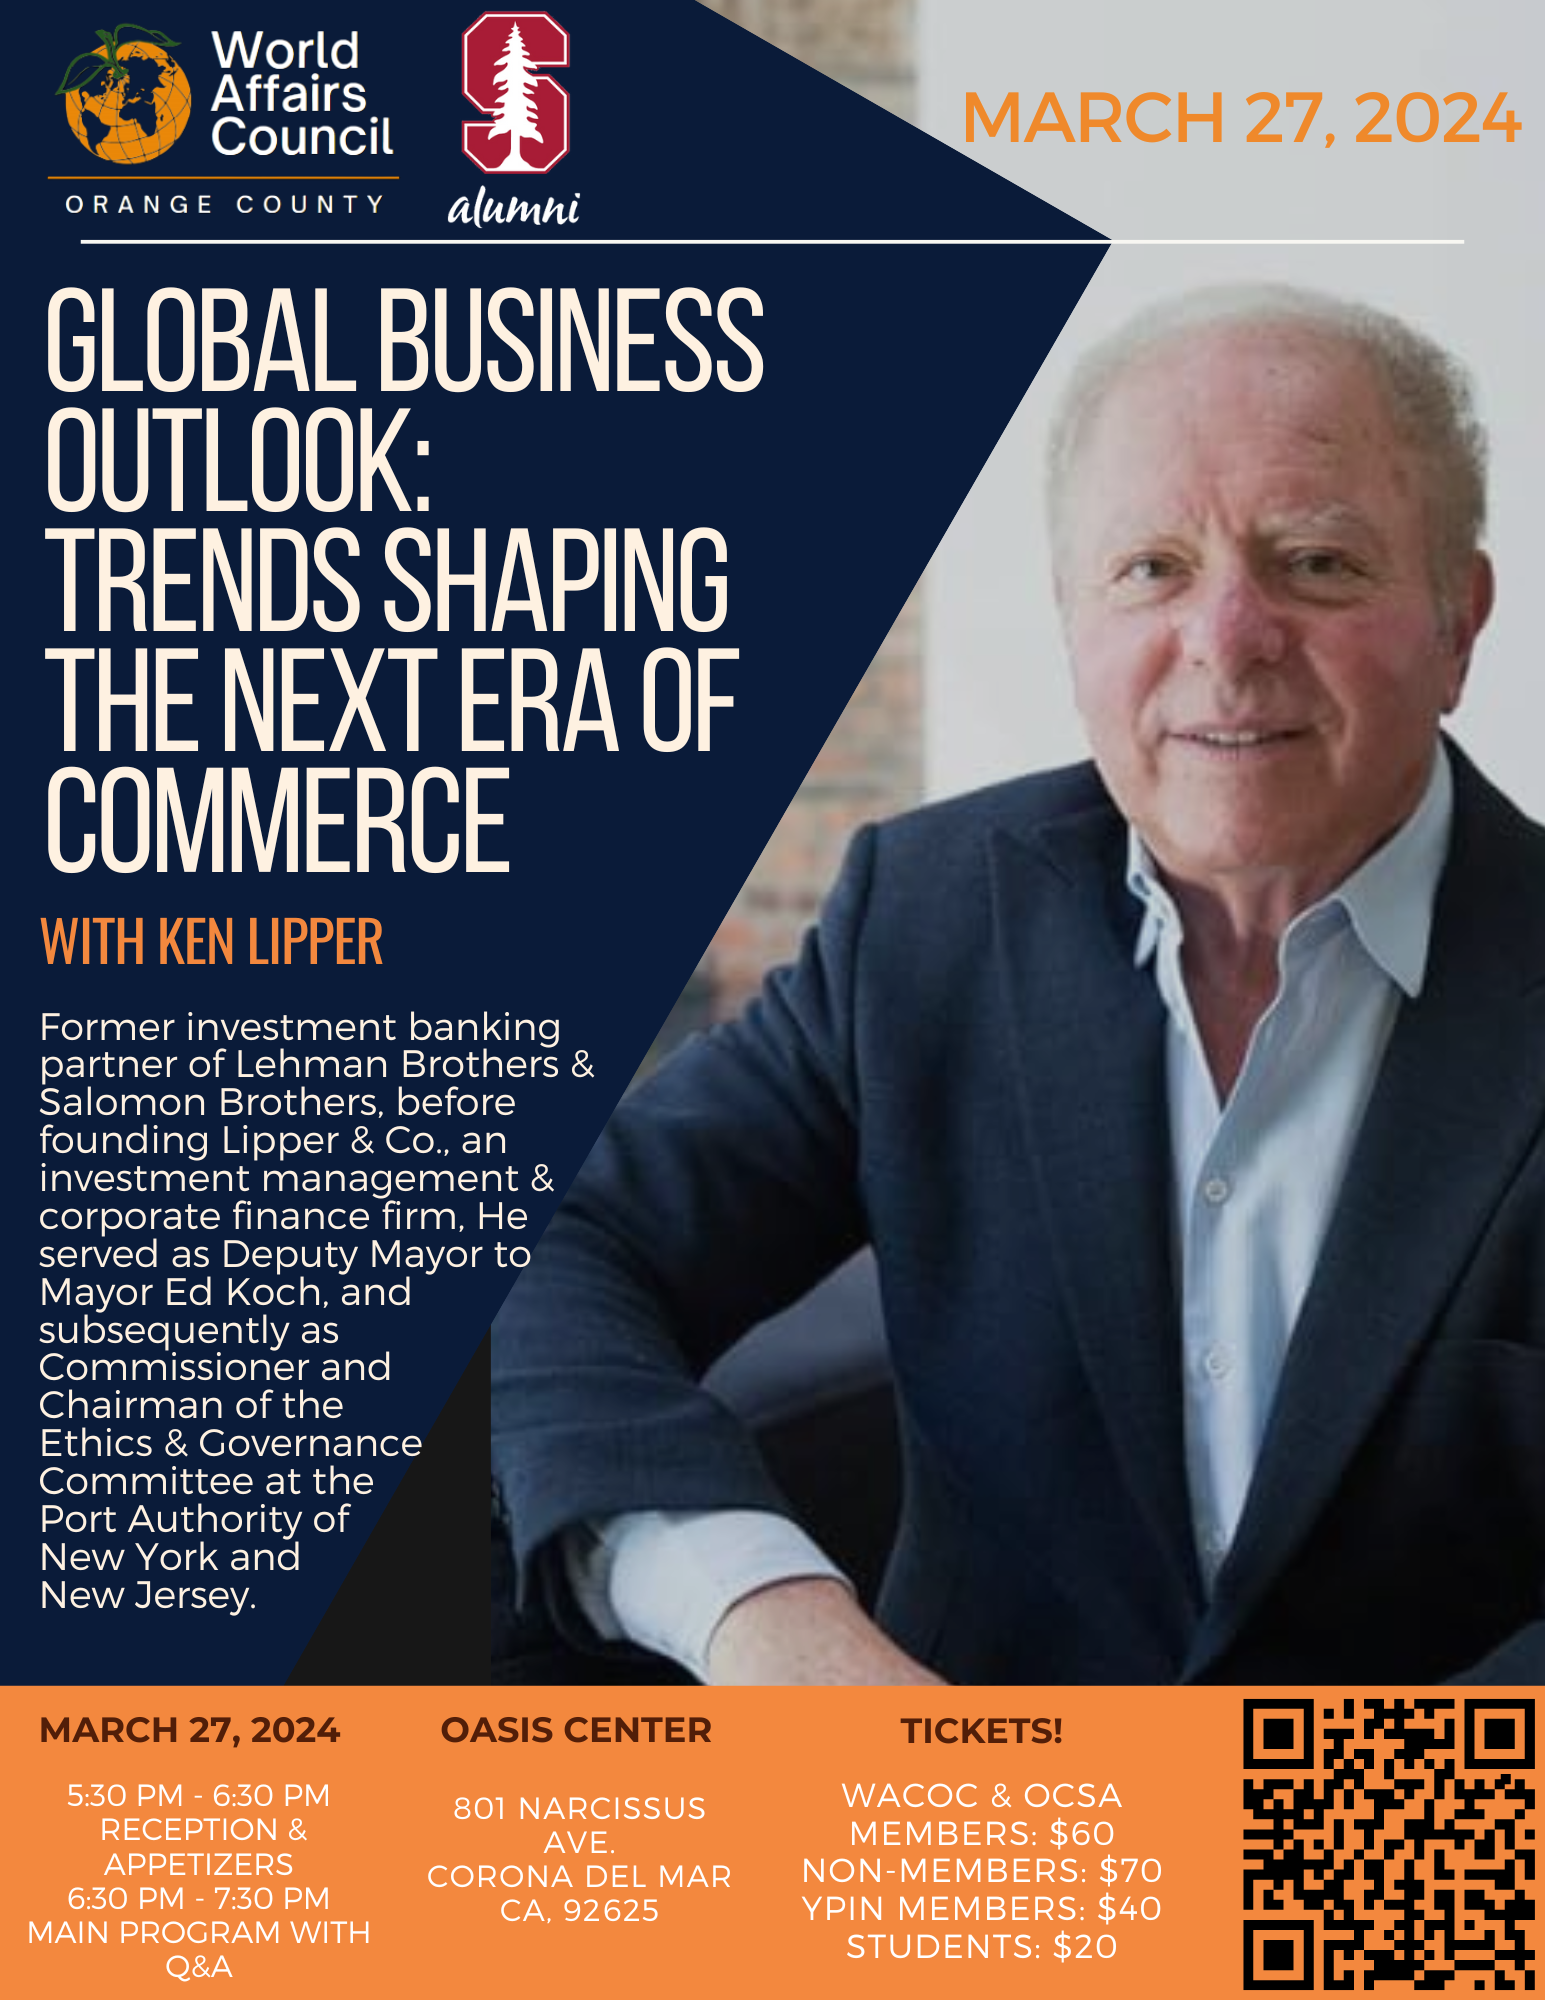 Global Business Outlook: Trends Shaping the Next Era of Commerce